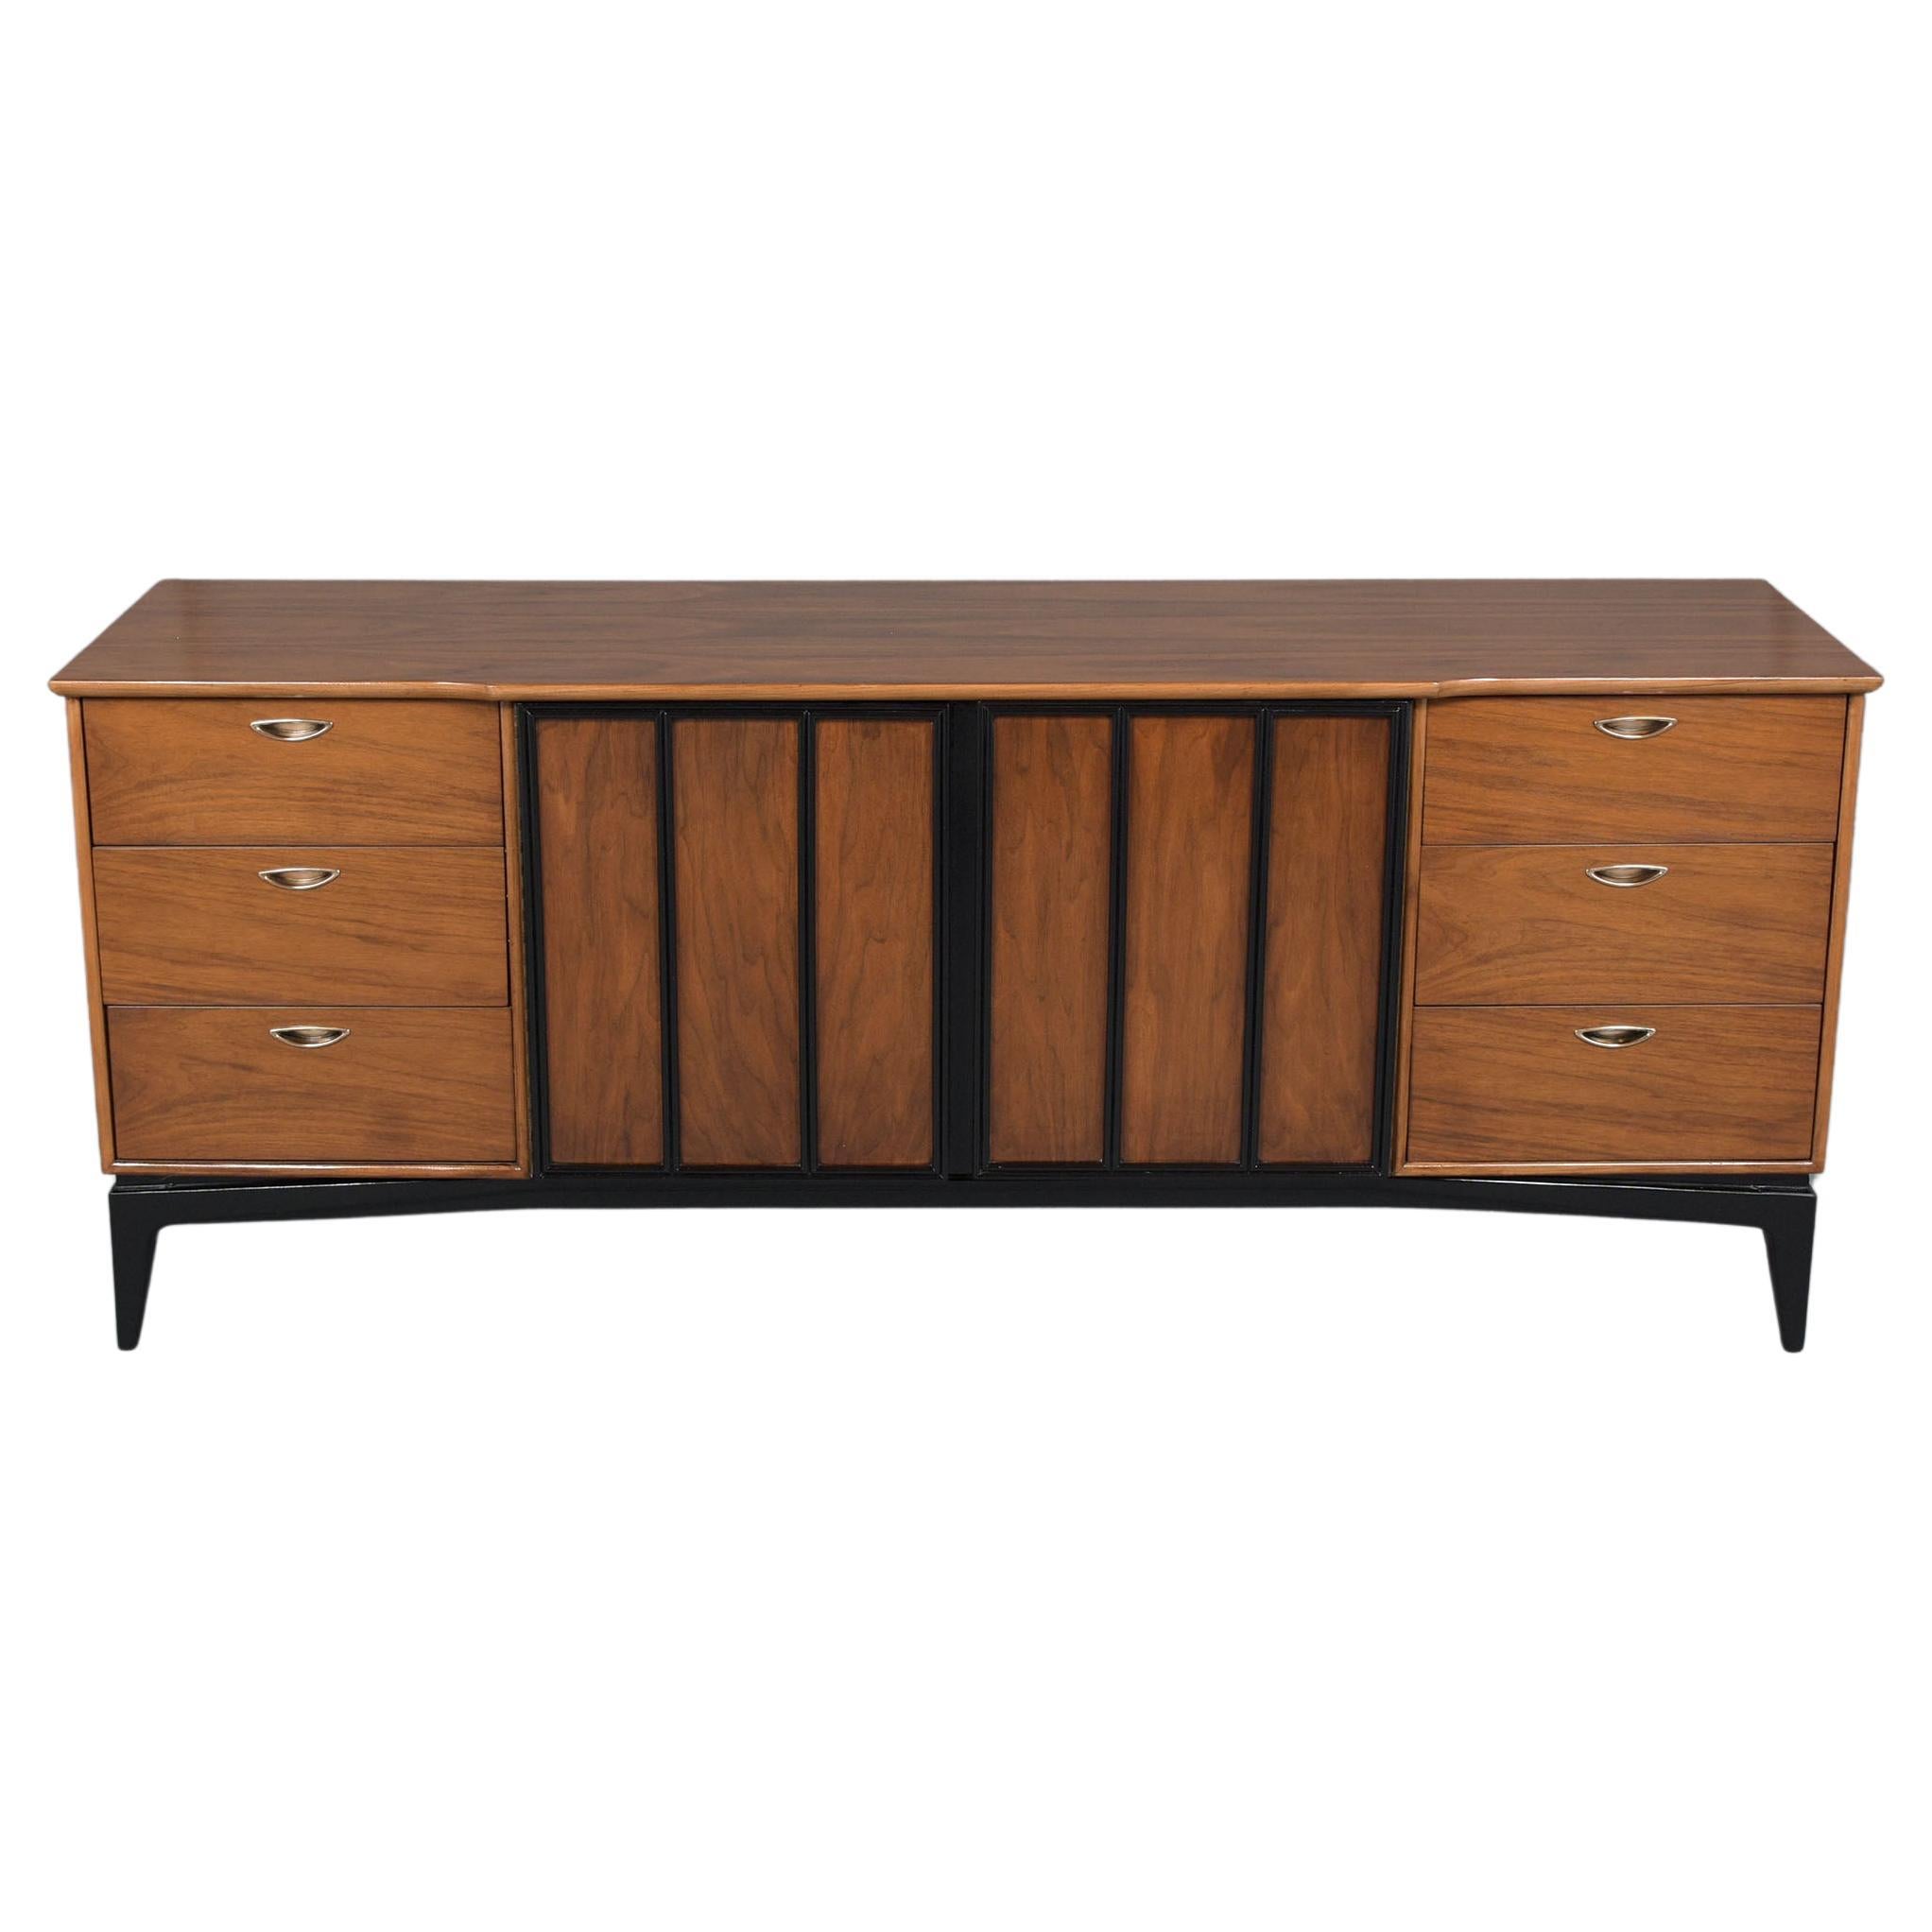 Restored 1960s Mid-Century Walnut Credenza - Modern Elegance for Living Spaces For Sale